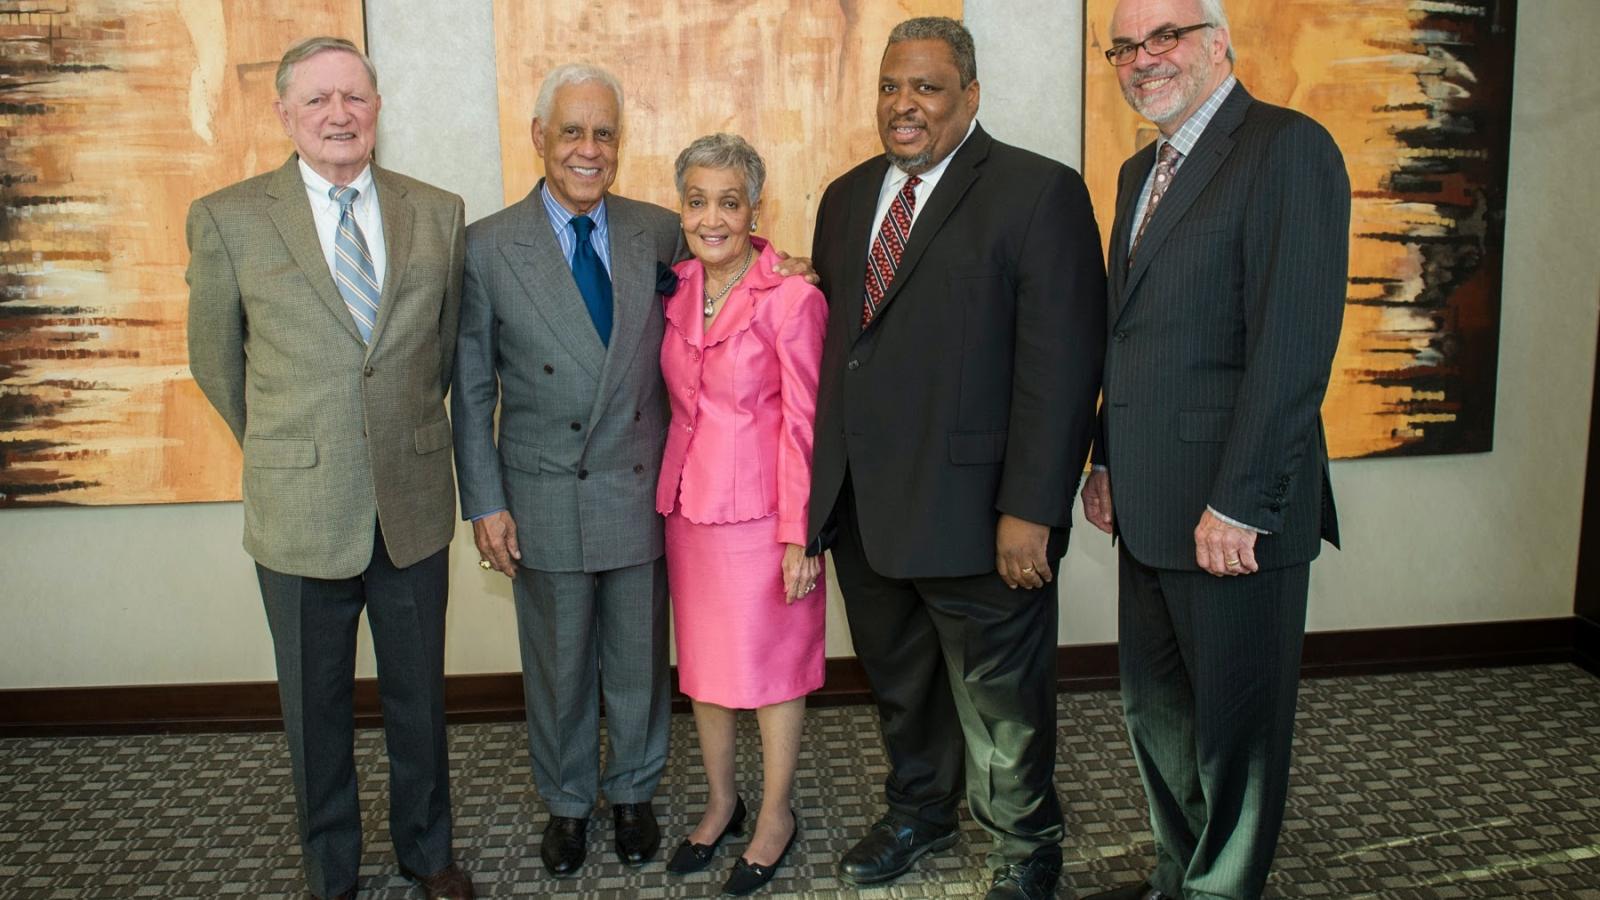 Florence Neal Cooper Smith with Dr. Robert Scott, Hon. Douglas L. Wilder, Dr. Wally Smith, and Dr. John Nestler